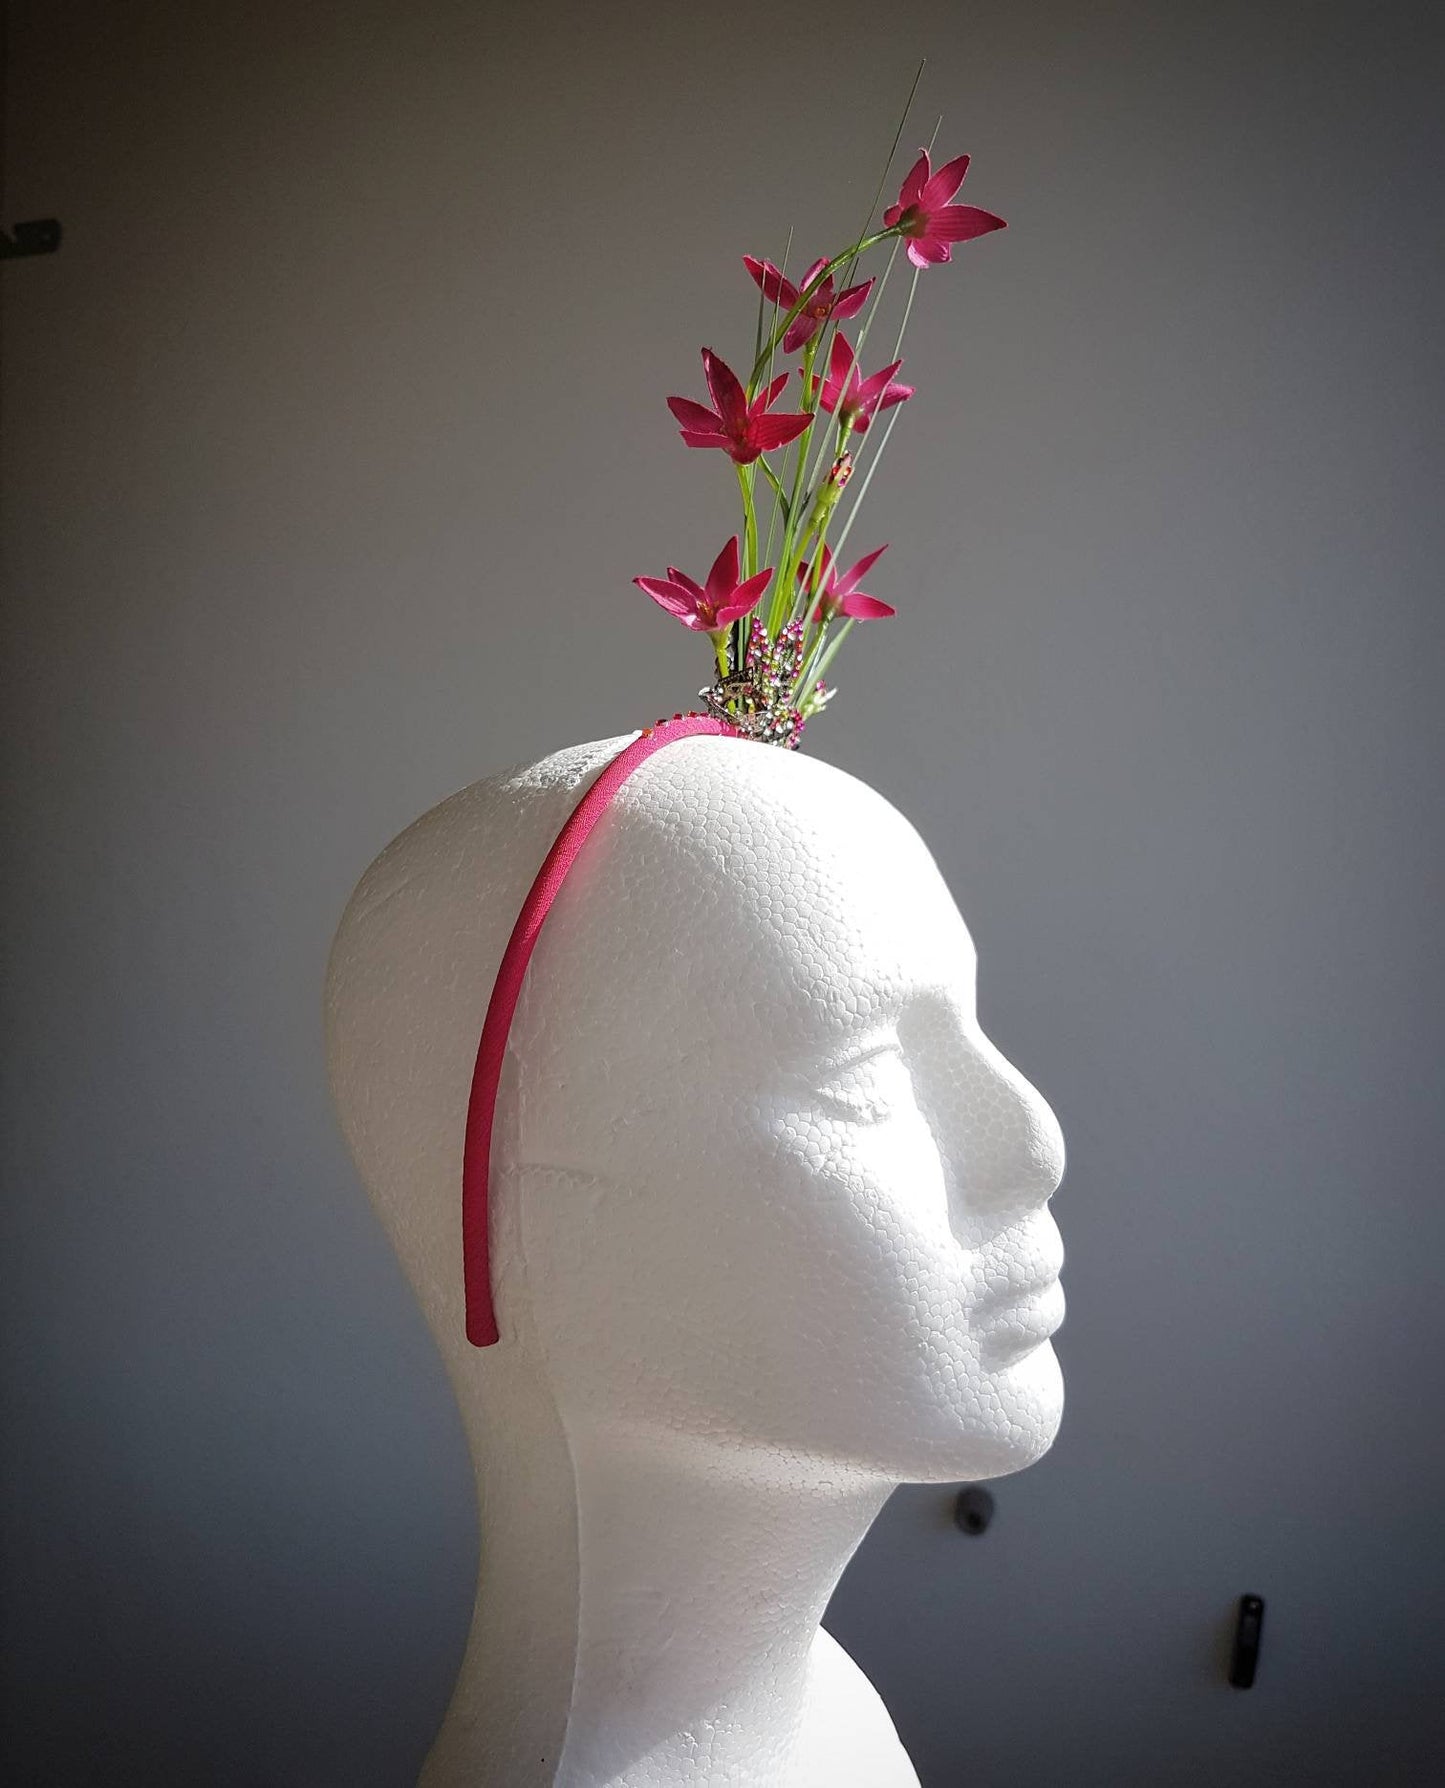 The Berries on a Straw Headpiece